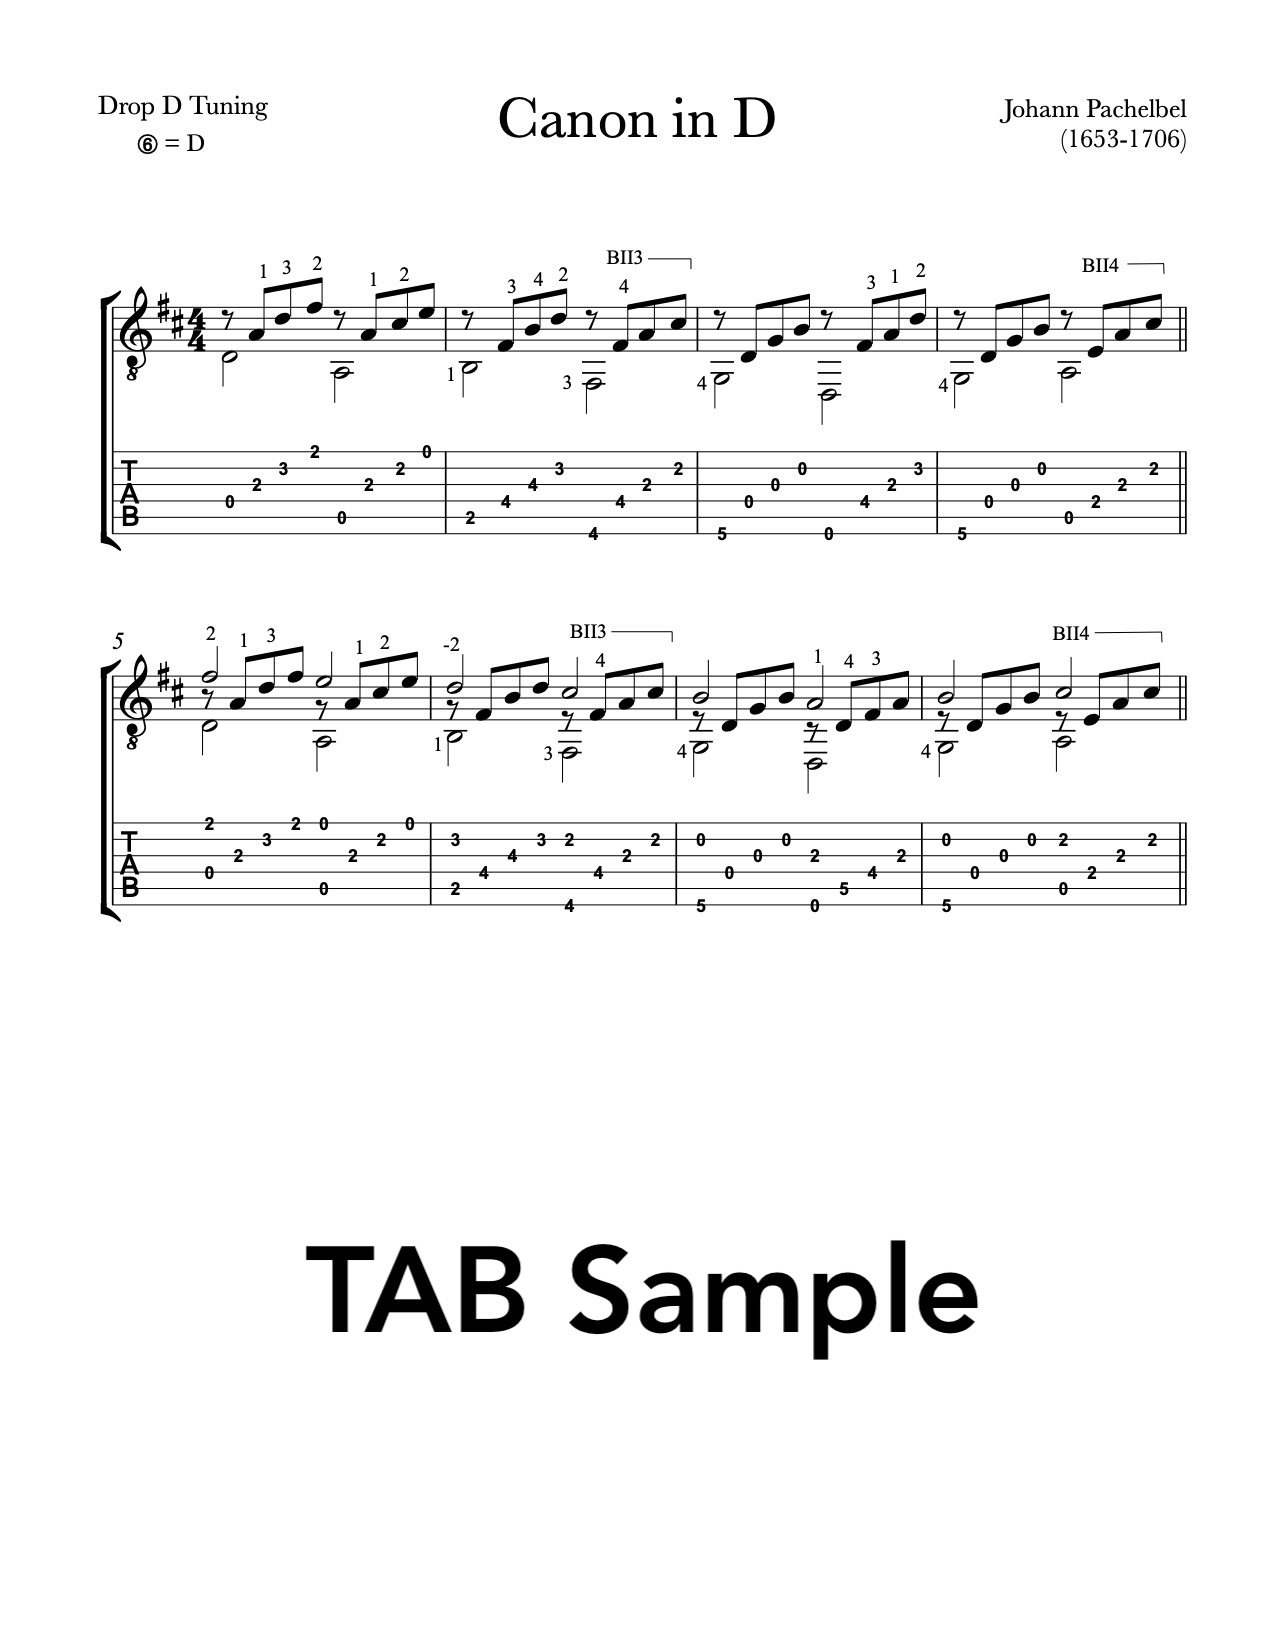 Canon D for Guitar - Free Sheet Music or Tab | This is Classical